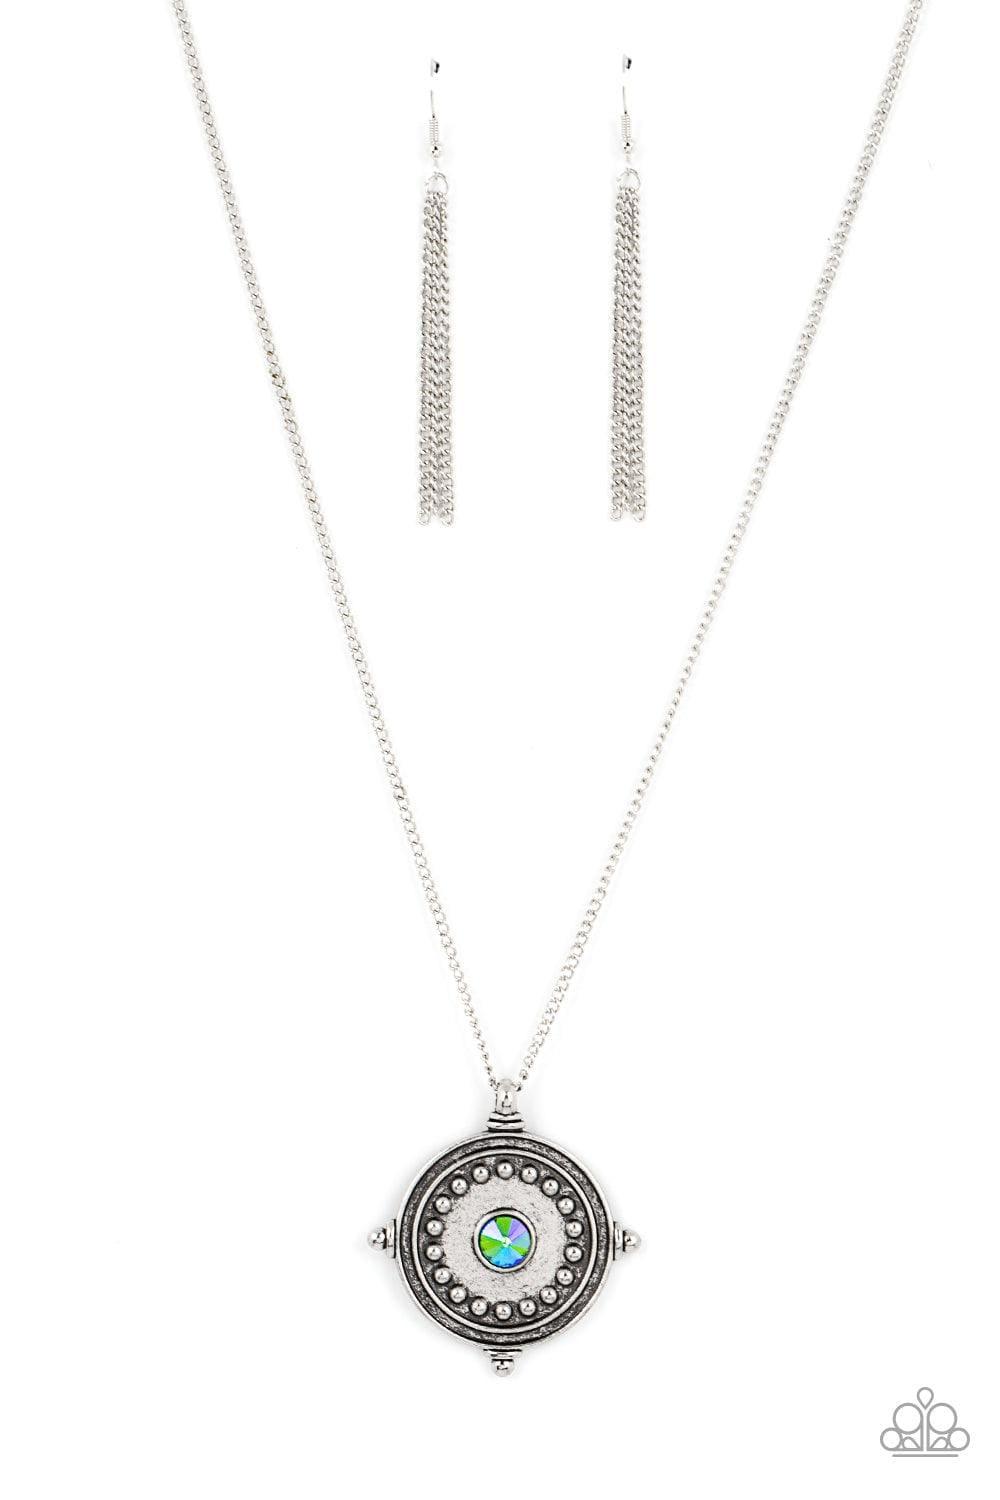 Paparazzi Accessories - Compass Composure - Green Necklace - Bling by JessieK